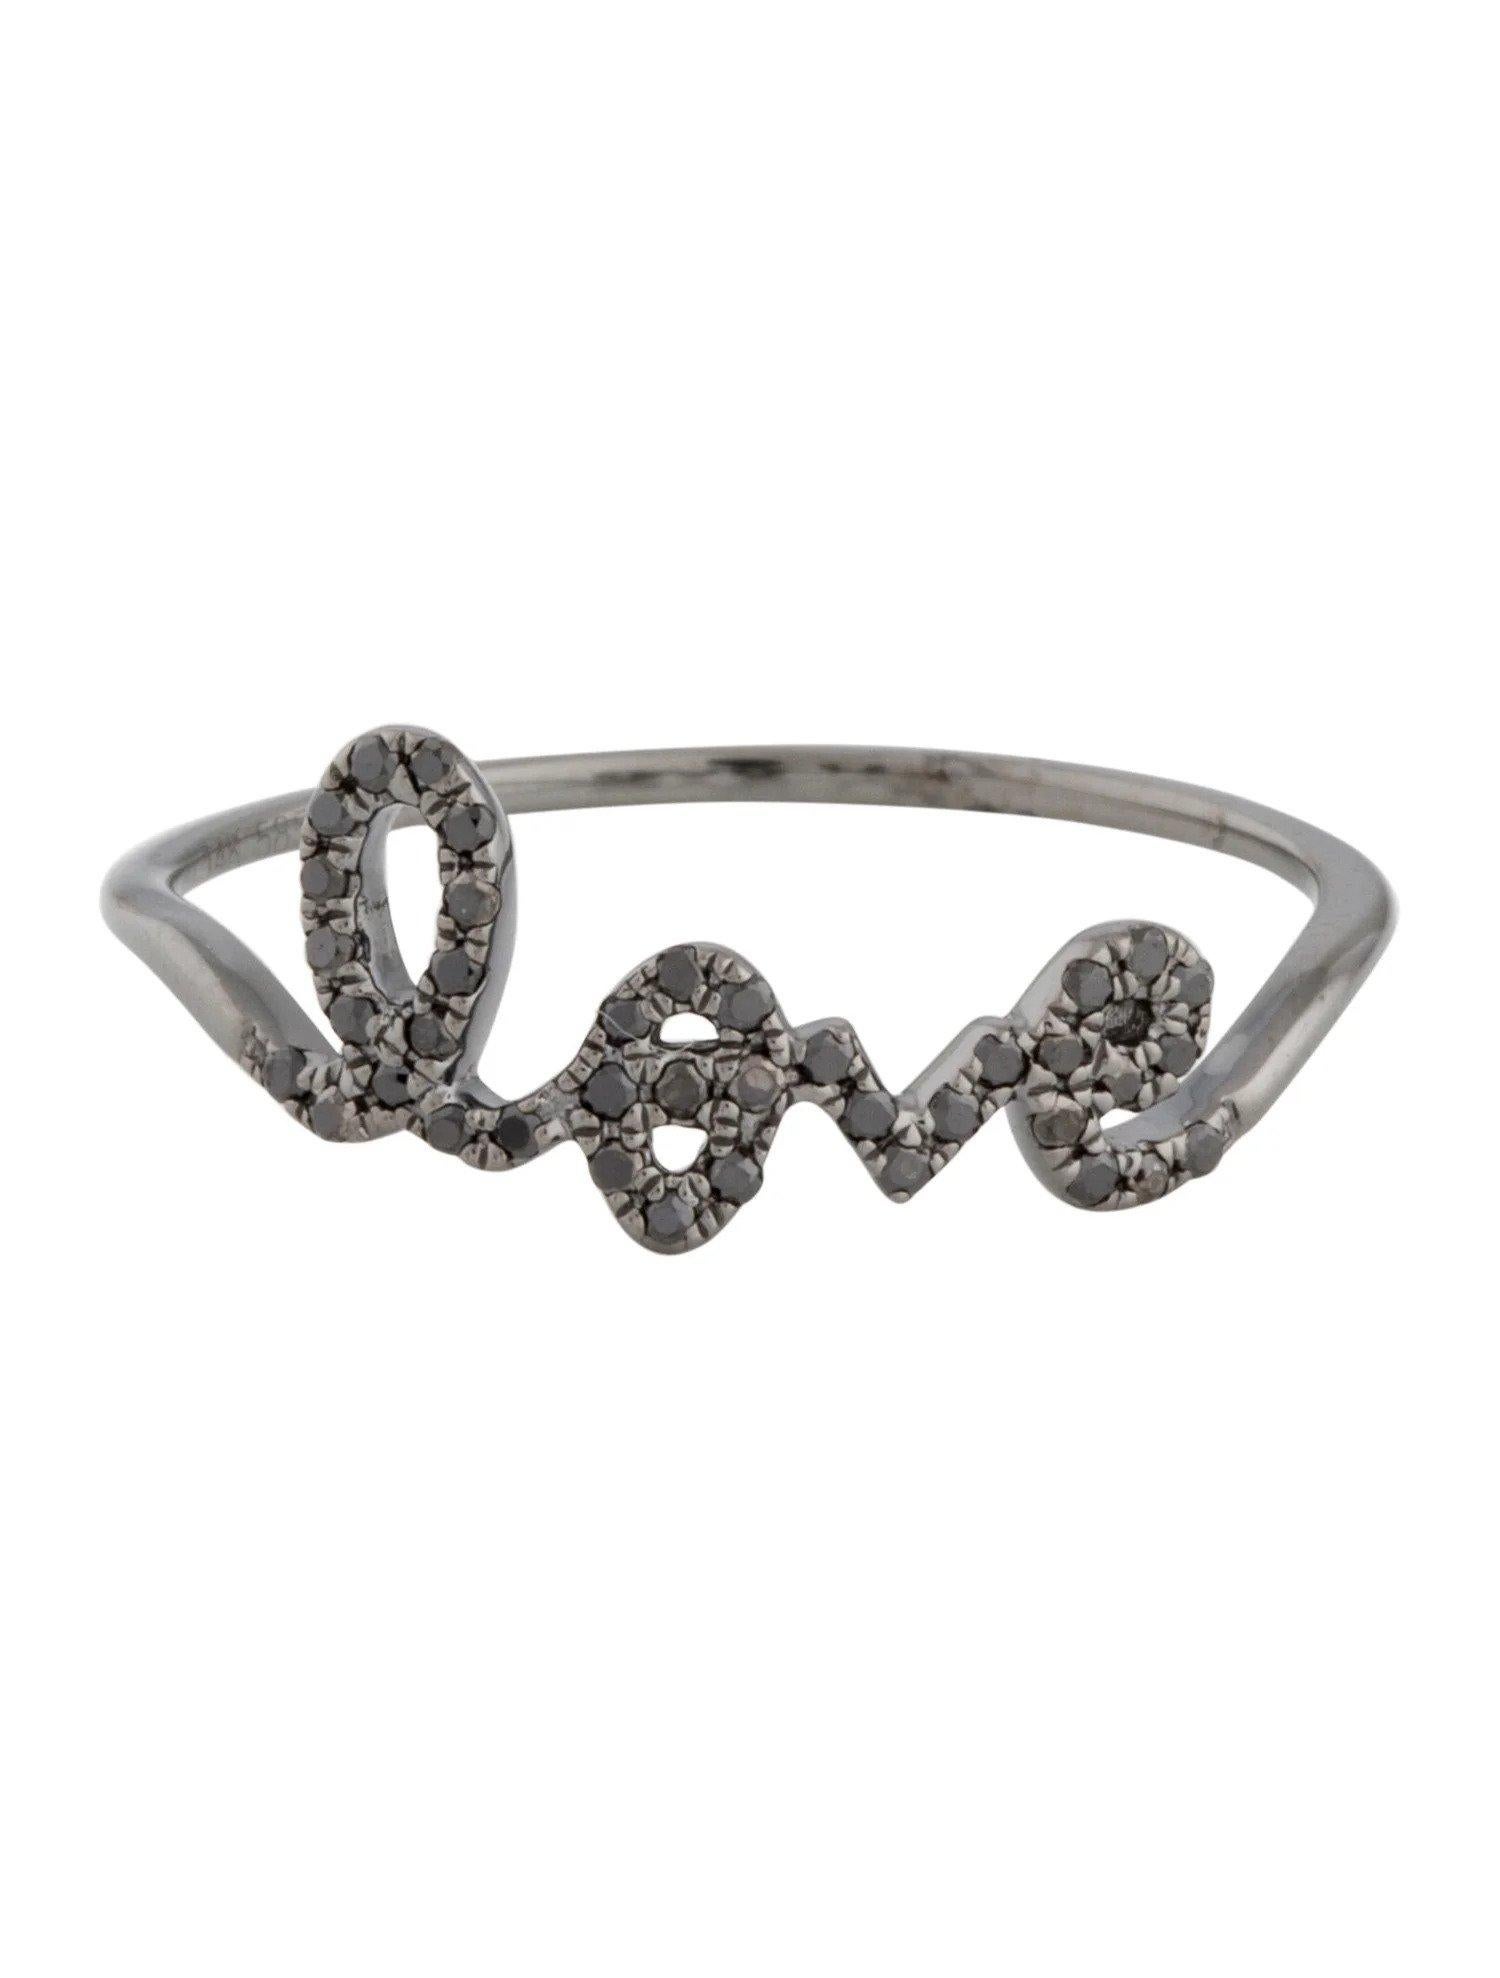 This Diamond Ring is a stunning and timeless accessory that can add a touch of glamour and sophistication to any outfit. This beautiful piece of jewelry features dazzling diamonds that sparkle and catch the light, making them the perfect choice for